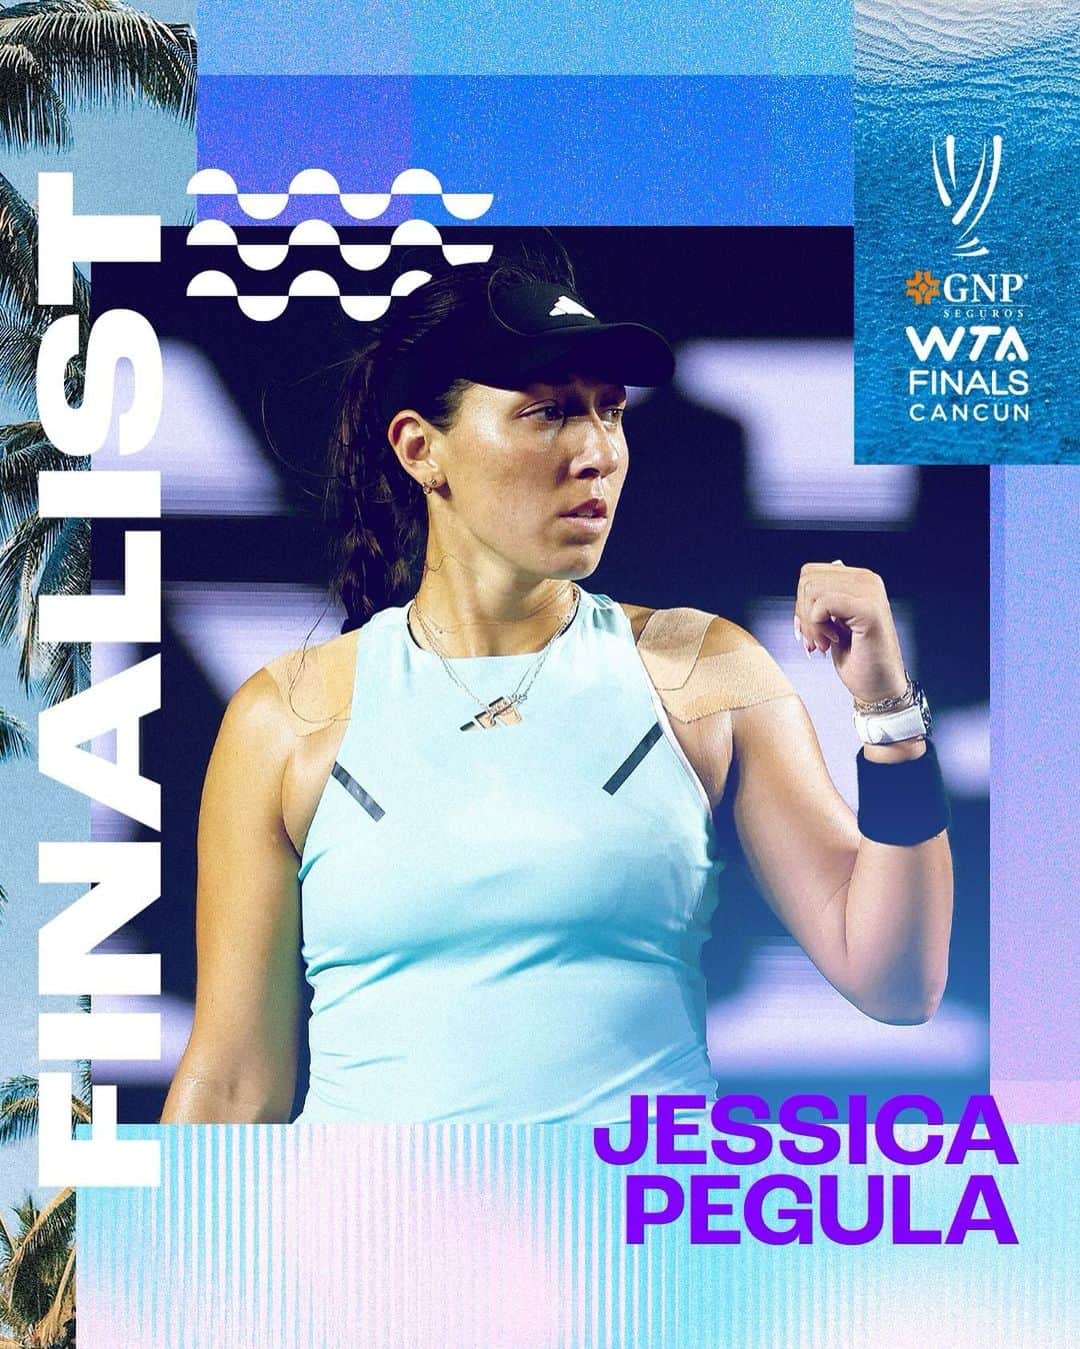 WTA（女子テニス協会）のインスタグラム：「9️⃣-0 in Mexico ✅ 5️⃣1️⃣-0 after winning the opening set ✅  @jpegula is on fire in Cancun, and is into her first GNP Seguros @wtafinals final! 🔥  #WTAFinals #GNPSegurosWTAFinalsCancun」